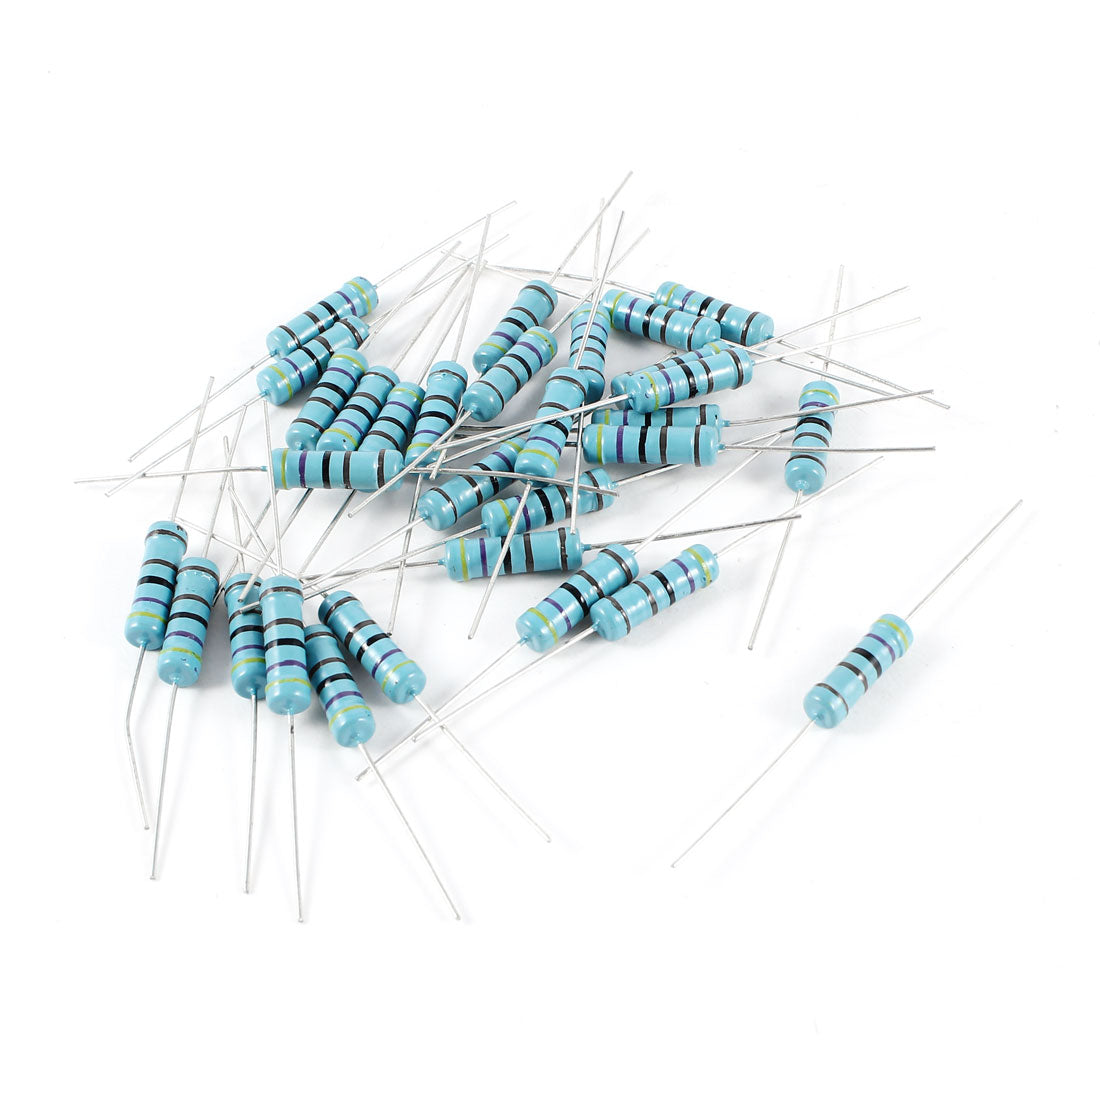 uxcell Uxcell 4.7K ohm 2W 1% Tolerance Through Hole Metal Oxide Film Fixed Resistors 30 Pcs